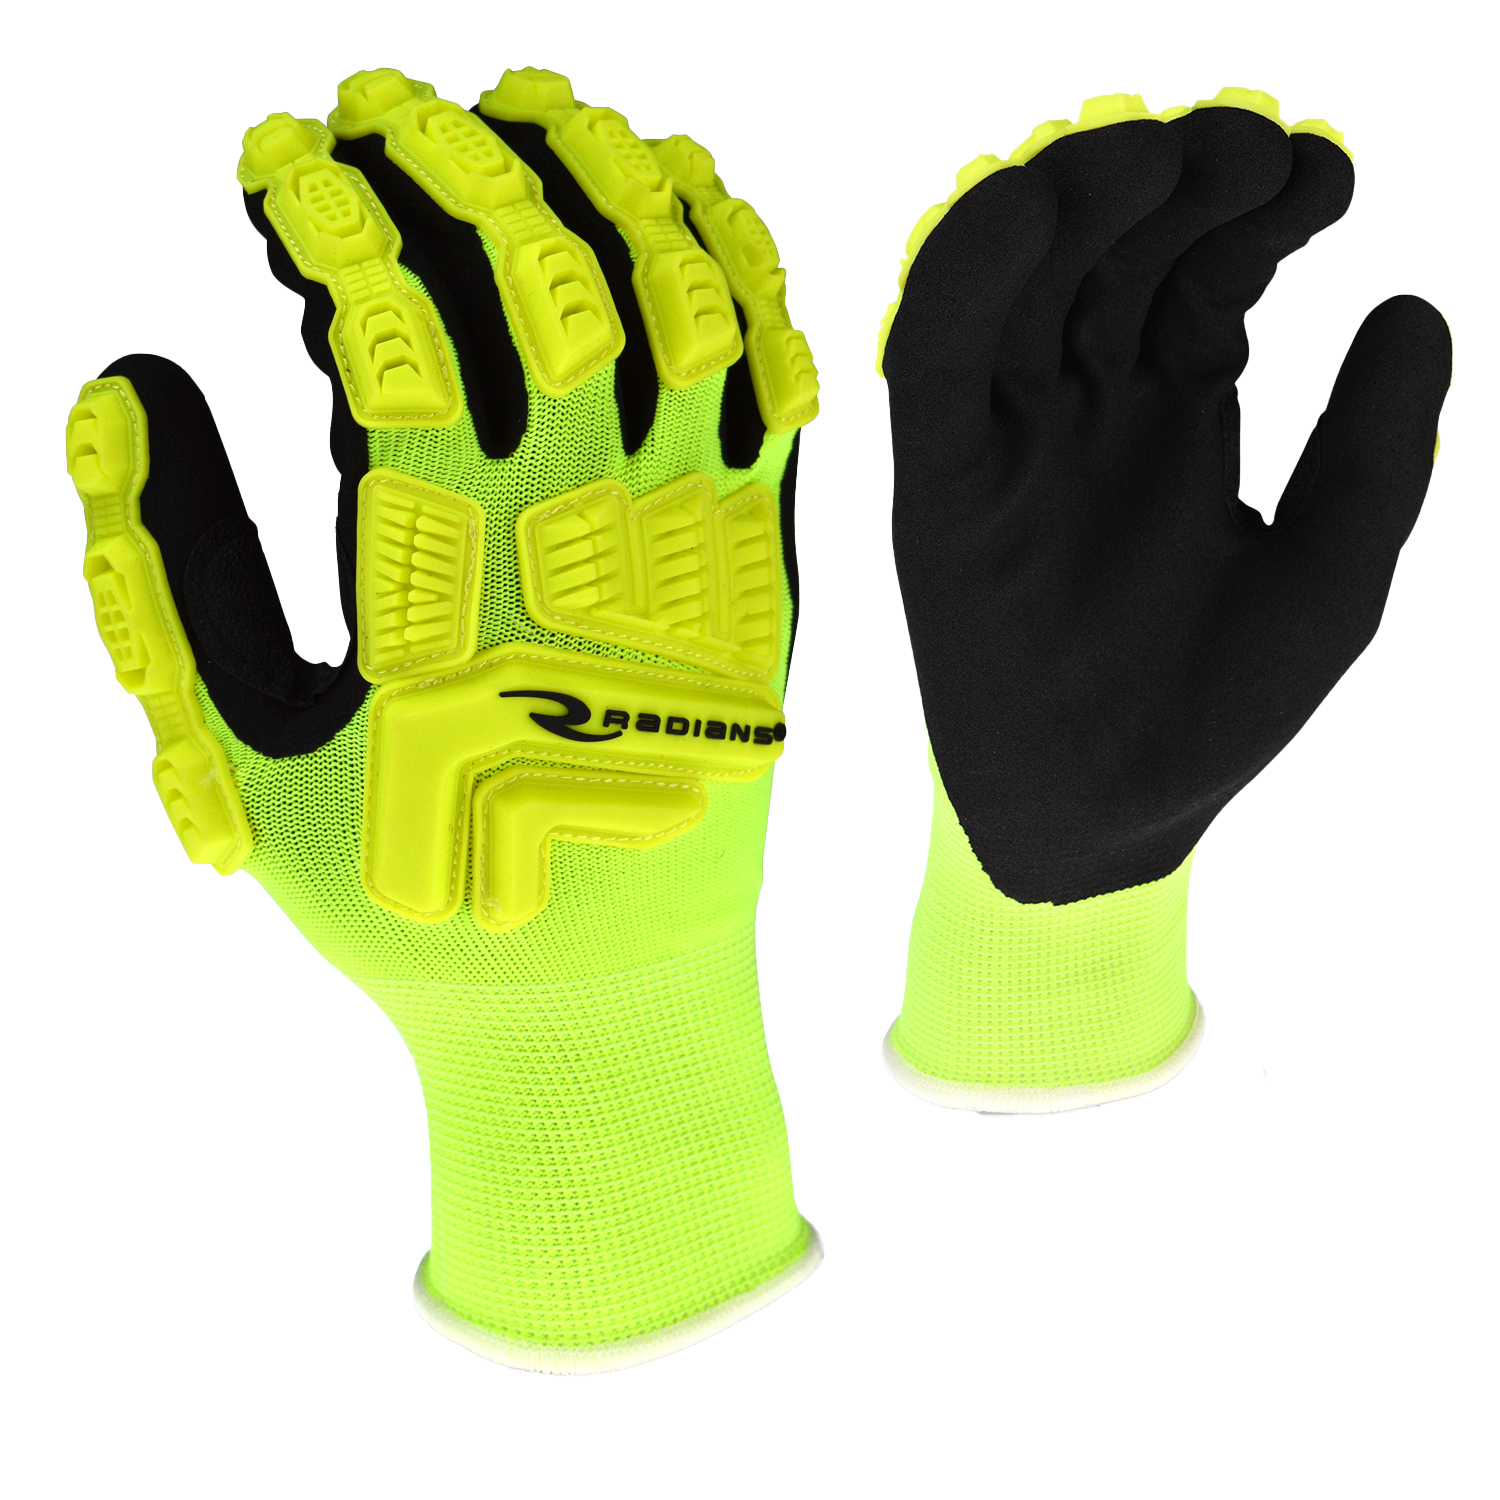 RWG21 High Visibility Work Glove with TPR - Size L